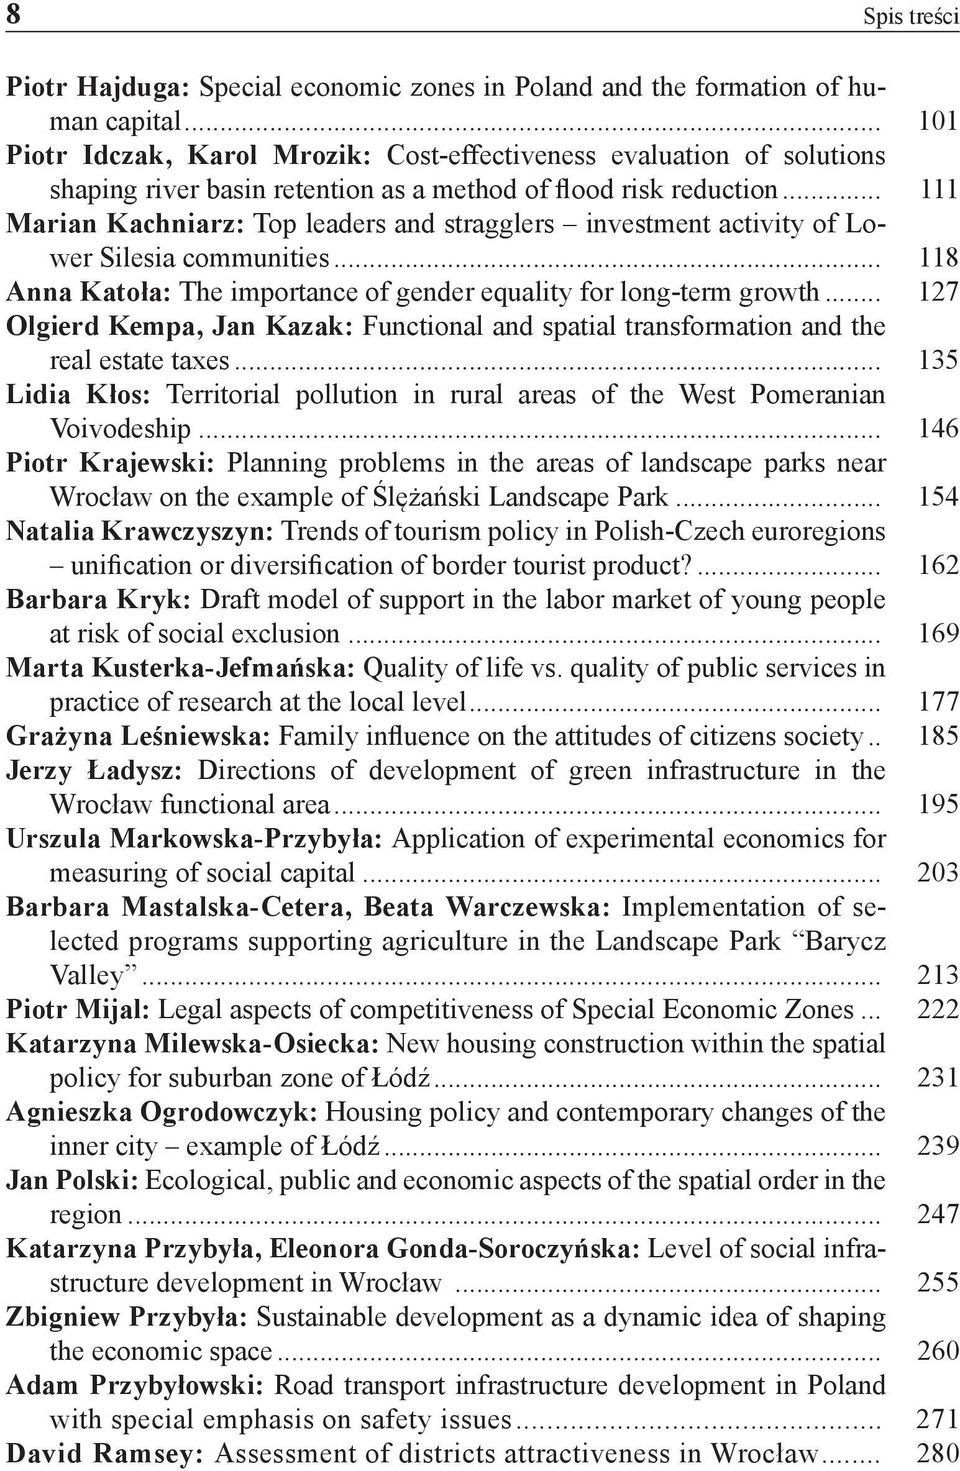 .. 111 Marian Kachniarz: Top leaders and stragglers investment activity of Lower Silesia communities... 118 Anna Katoła: The importance of gender equality for long-term growth.